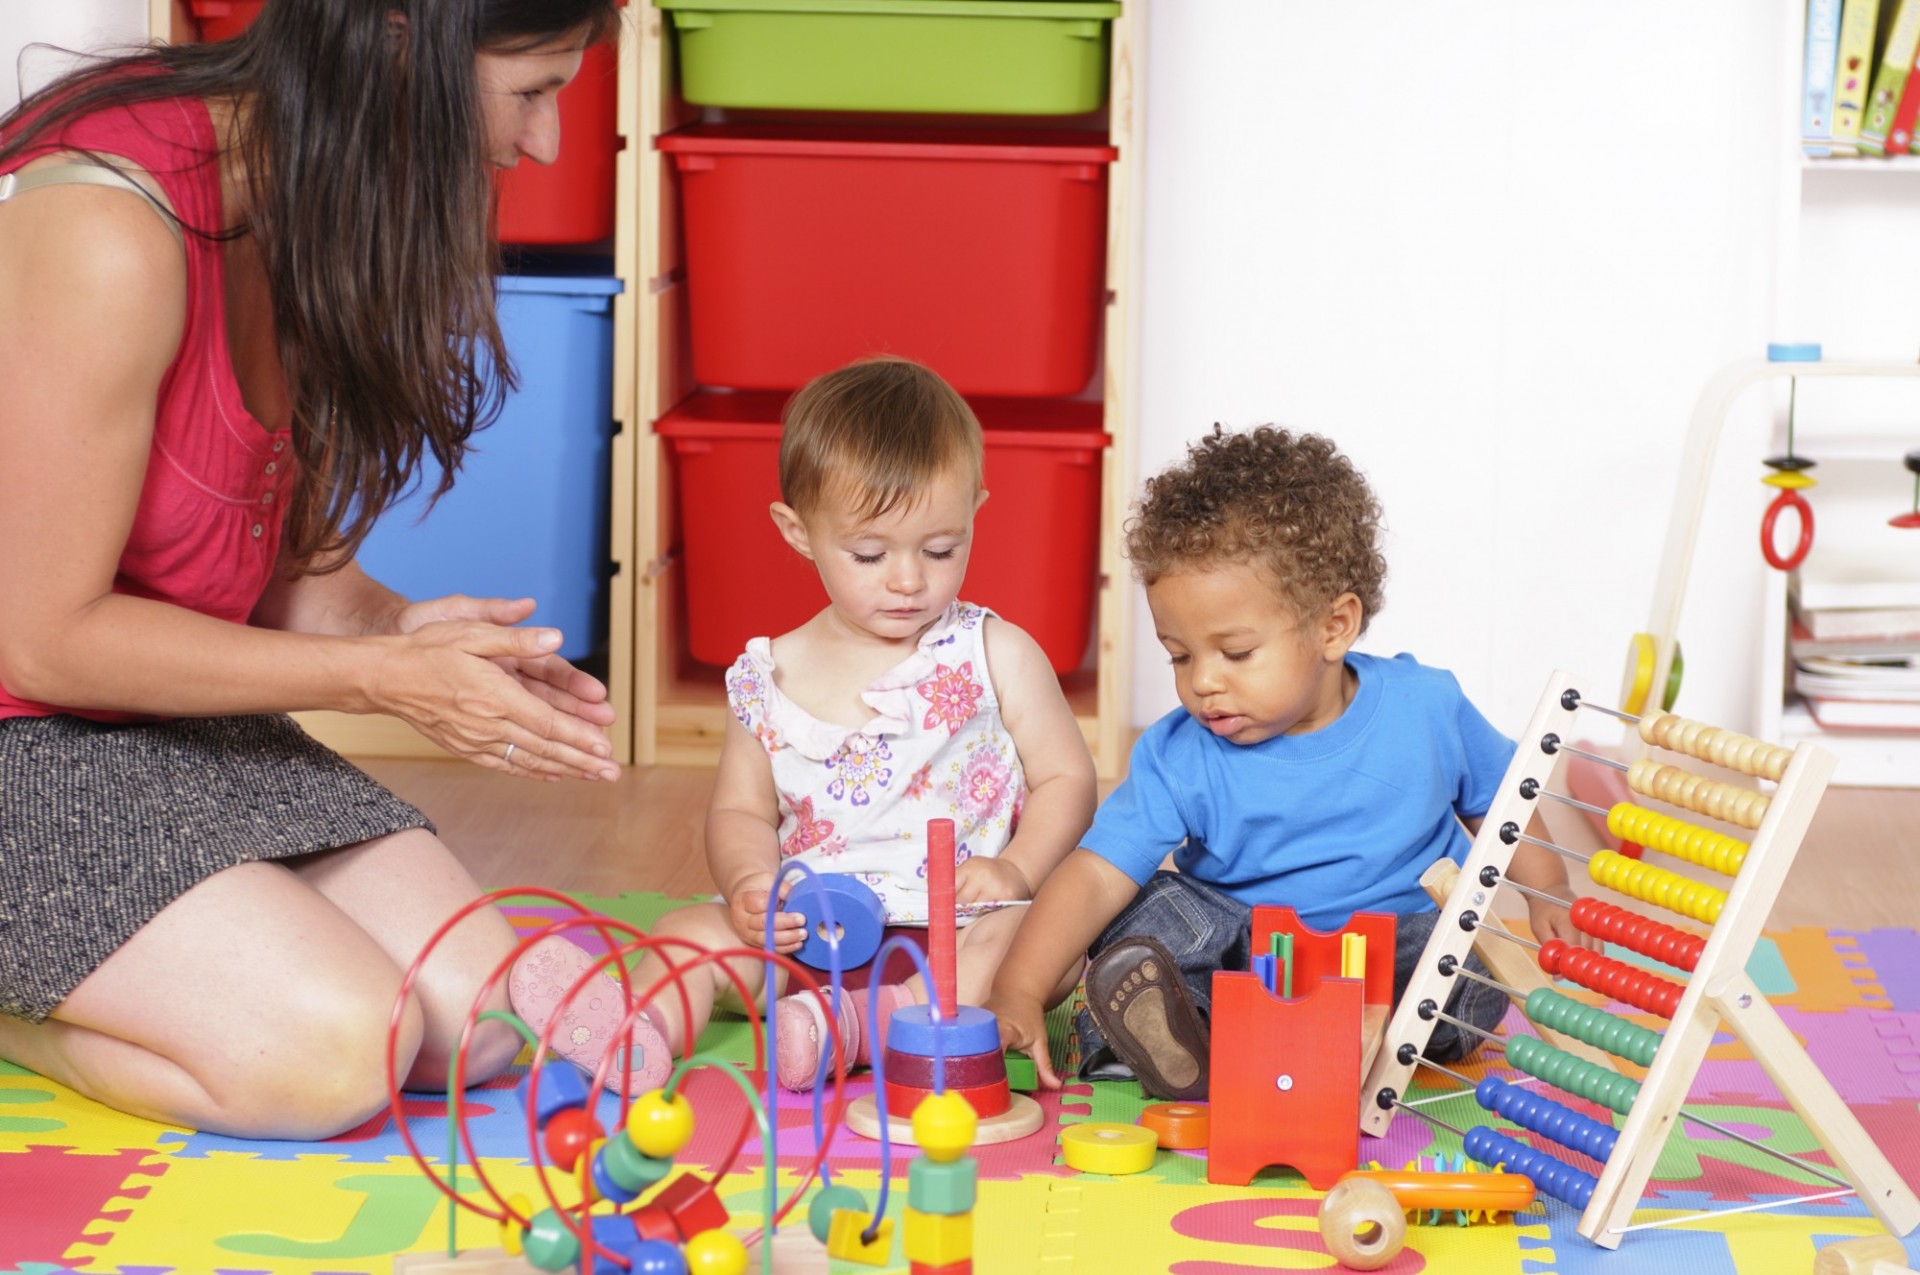 Two toddlers playing on floor with brightly colored toys while adult looks on.